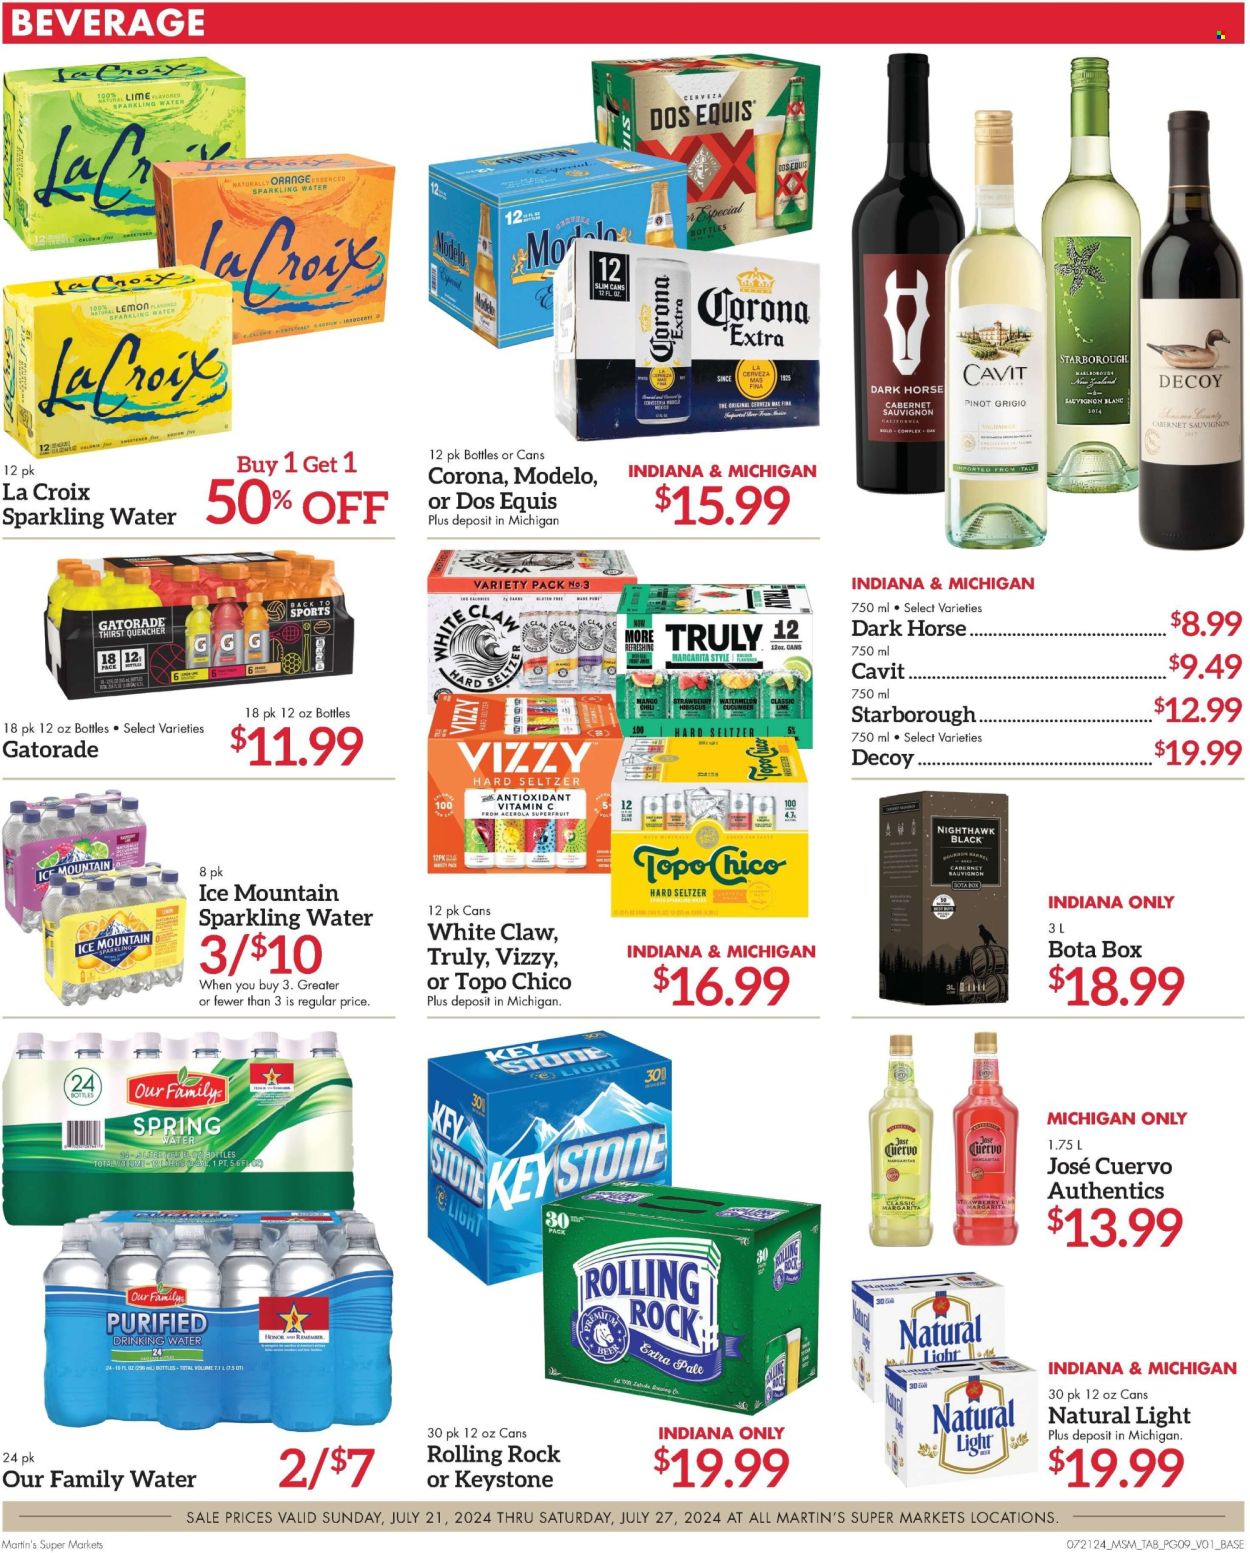 thumbnail - Martin’s Flyer - 07/21/2024 - 07/27/2024 - Sales products - bread, cucumber, sweetener, Gatorade, electrolyte drink, spring water, purified water, Ice Mountain, water, cocktail, Cabernet Sauvignon, red wine, white wine, wine, alcohol, Pinot Grigio, Sauvignon Blanc, tequila, White Claw, Hard Seltzer, TRULY, beer, Corona Extra, Keystone, Modelo, Topo Chico, Dos Equis. Page 9.